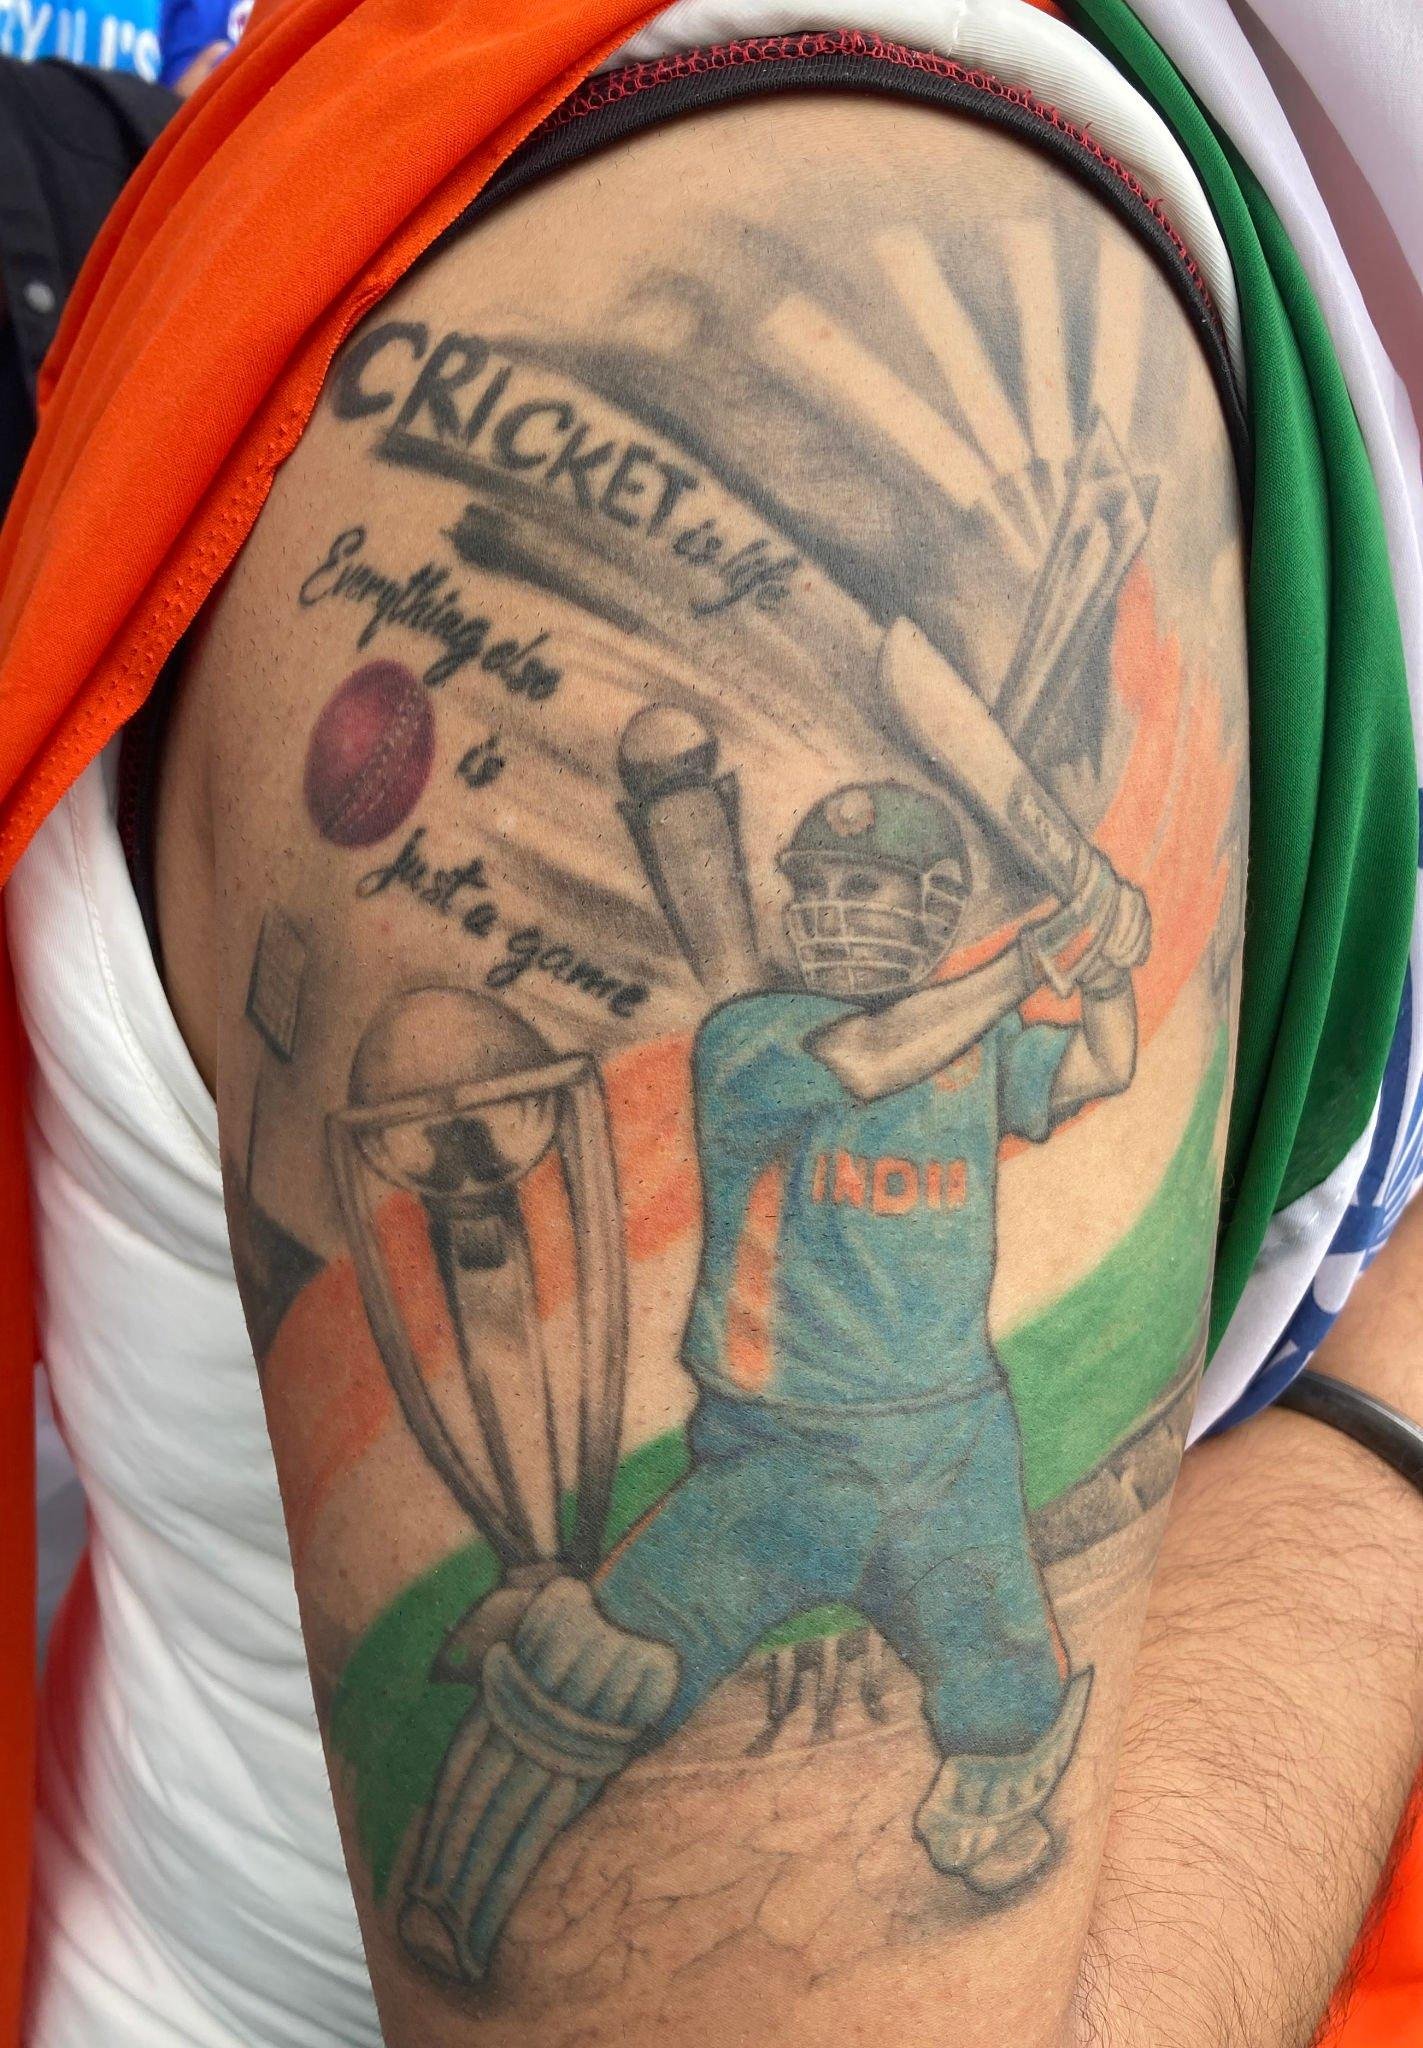 Ms Dhoni Tattoo by Being animal tattoos by Samarveera2008 on DeviantArt